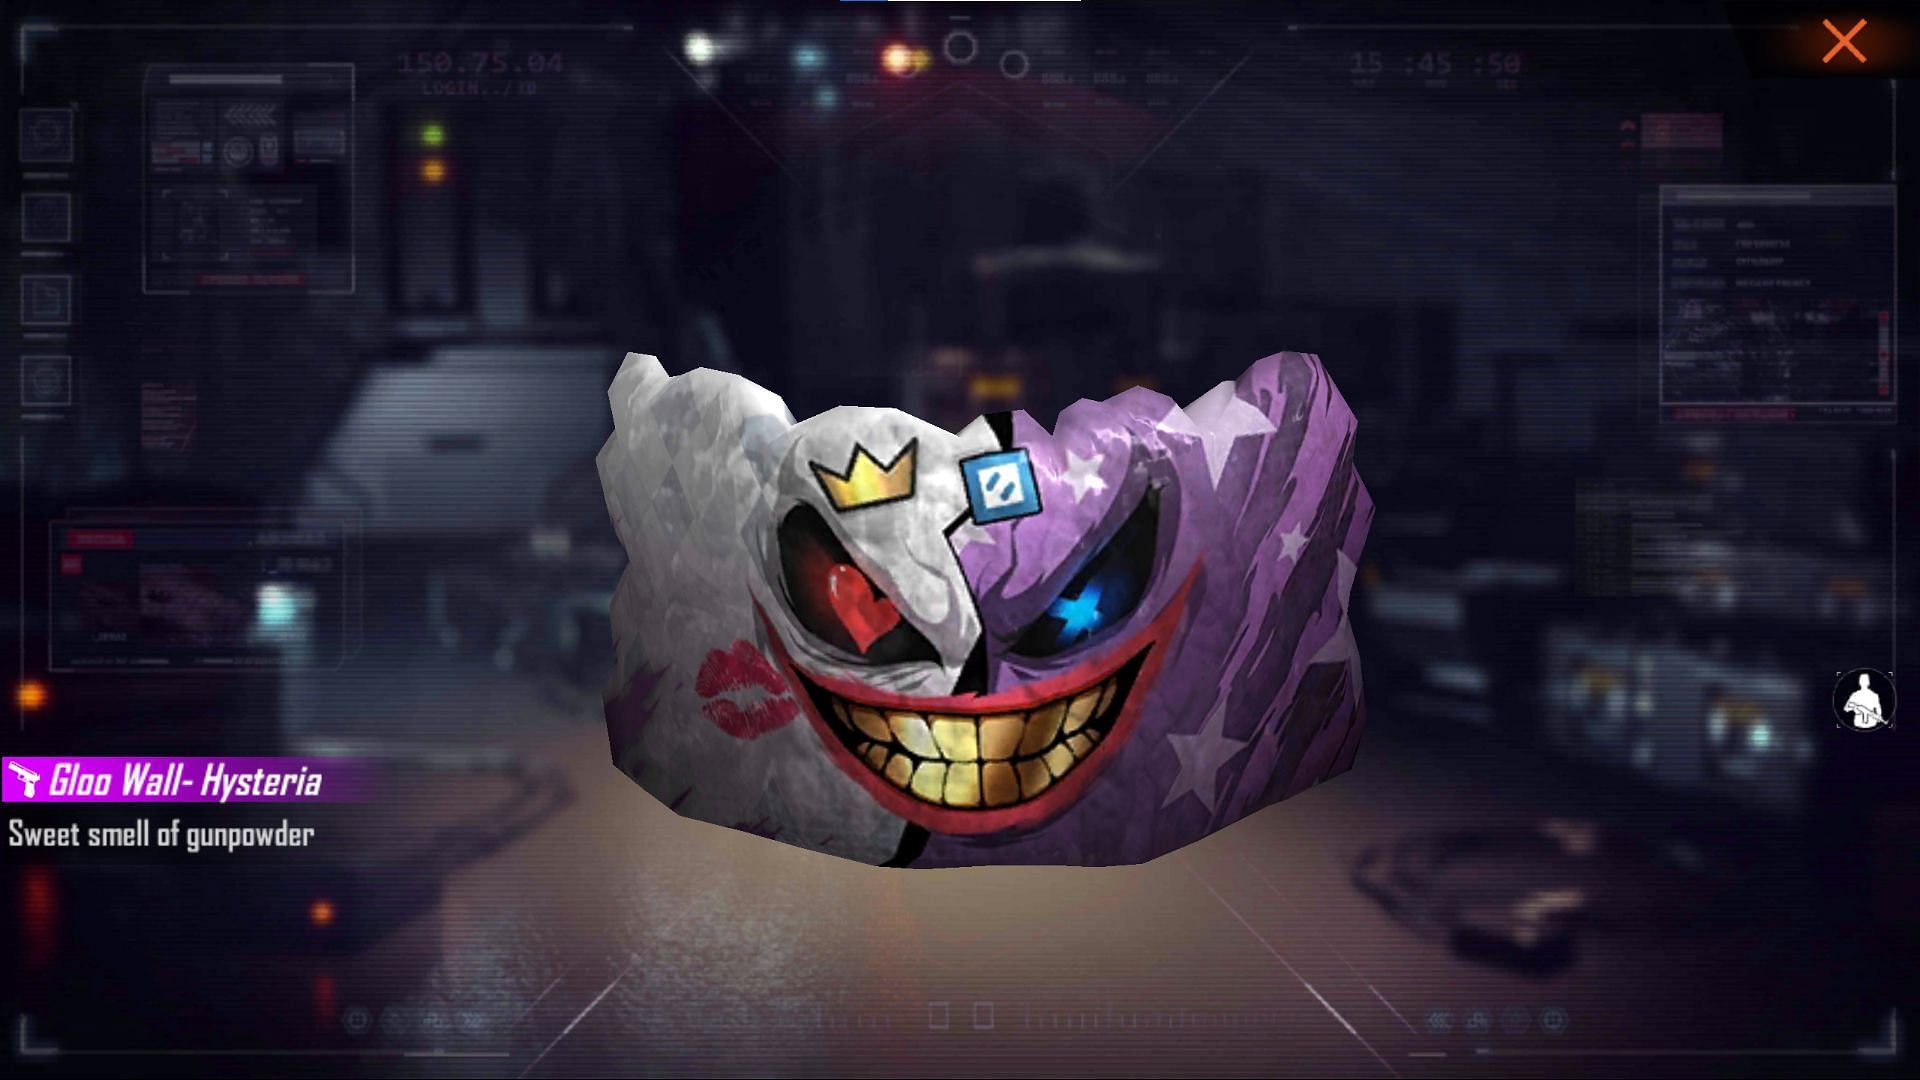 This was one of the rewards offered in the gloo wall redeem code (Image via Garena)